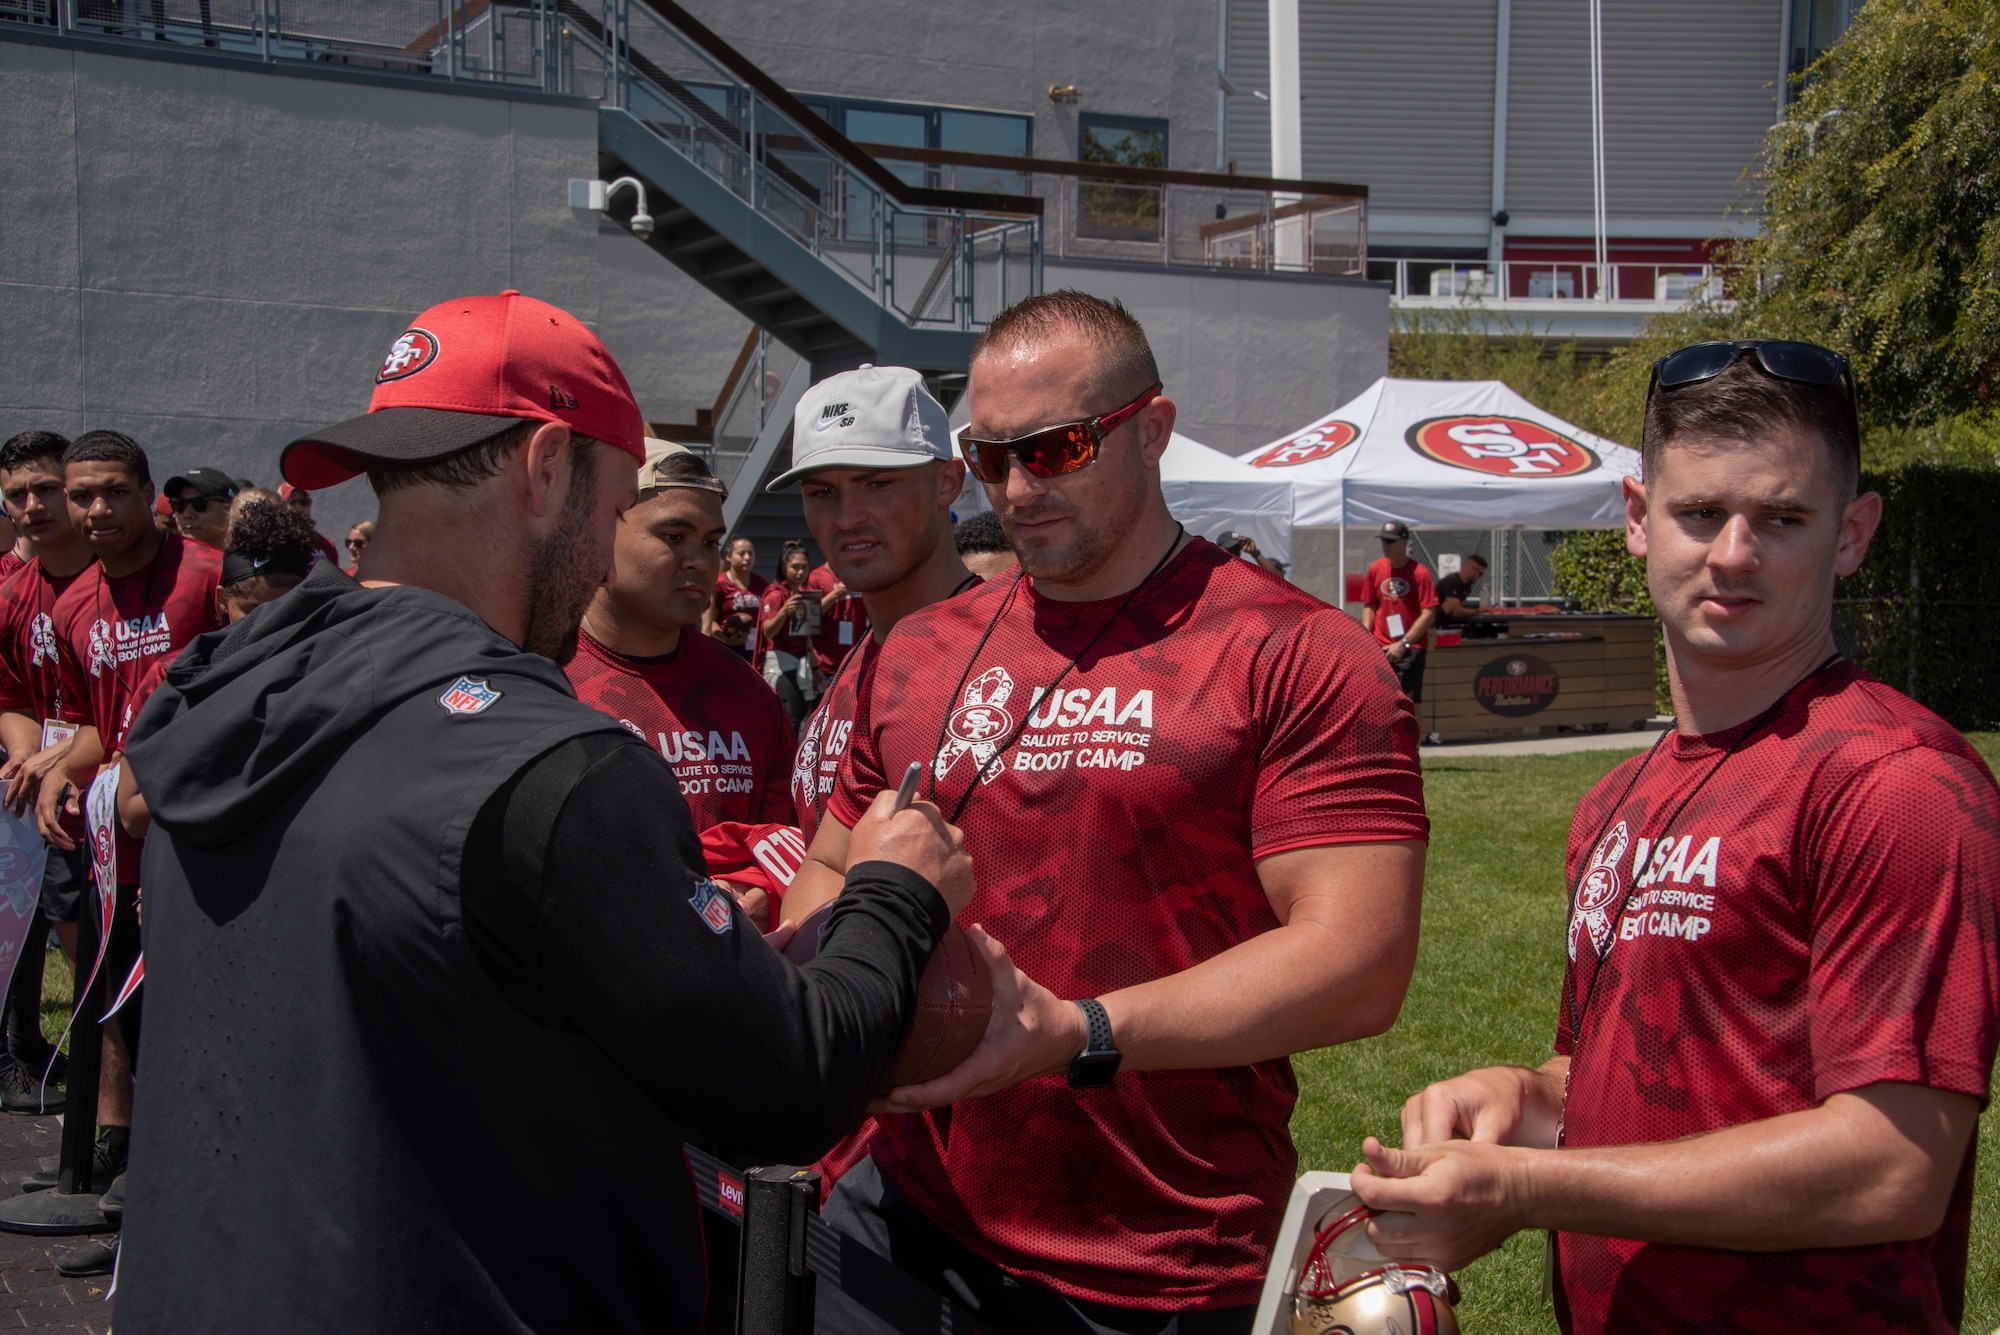 San Francisco 49ers wide receivers coach Wes Welker signs autographs for Airmen from Travis Air Force Base, California, Aug. 13, 2019, during the Salute to Service Boot Camp event in Santa Clara, California. The event provided Airmen with an opportunity to interact with NFL players and compete against one another in a variety of athletic drills. (U.S. Air Force photo by Tech. Sgt. James Hodgman)